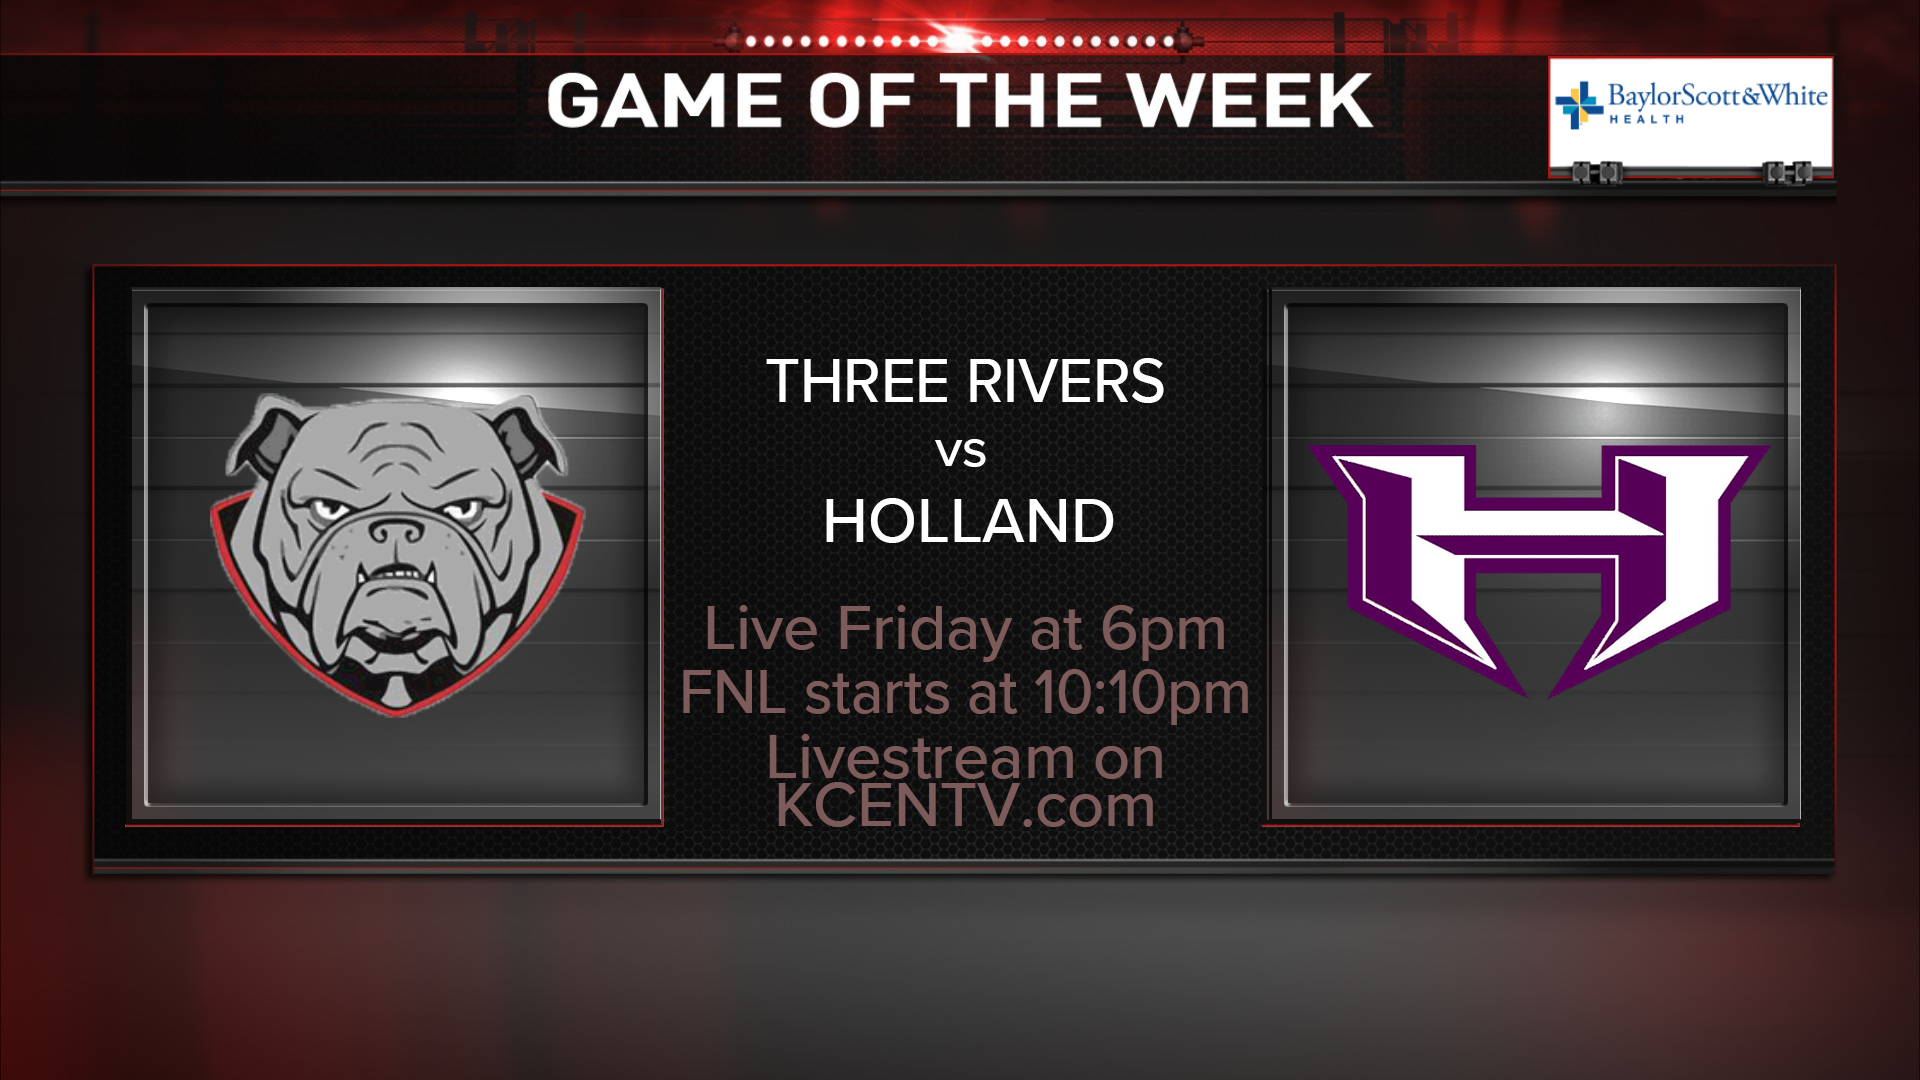 The Game of the Week will feature Holland and Three Rivers